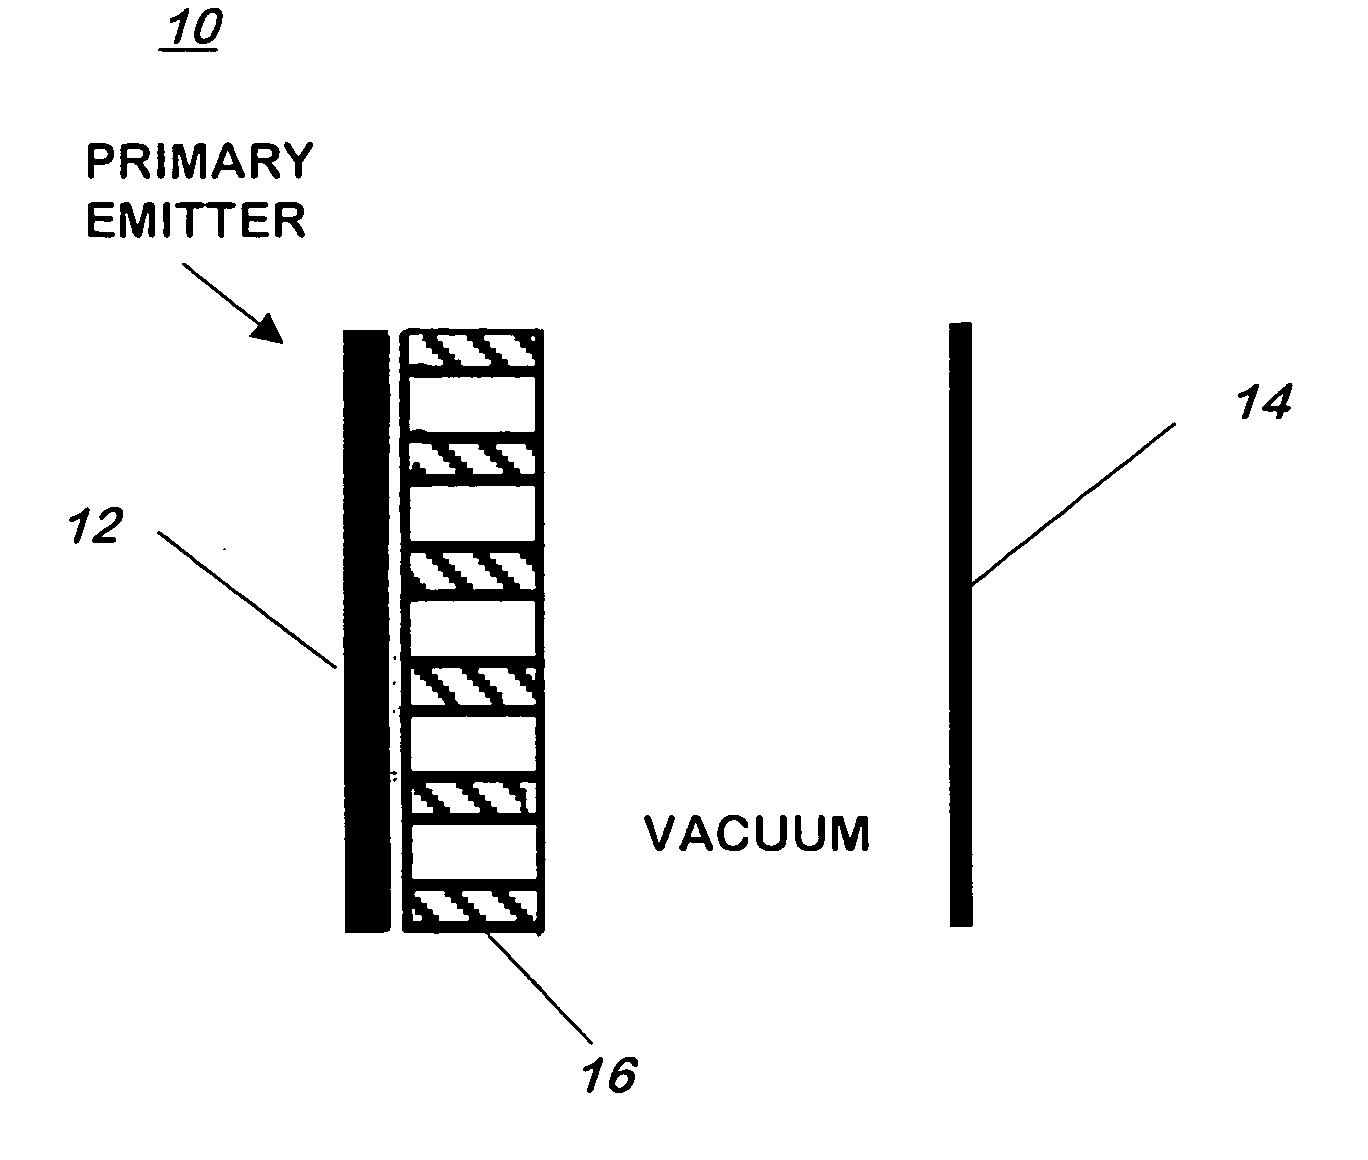 High power diode utilizing secondary emission